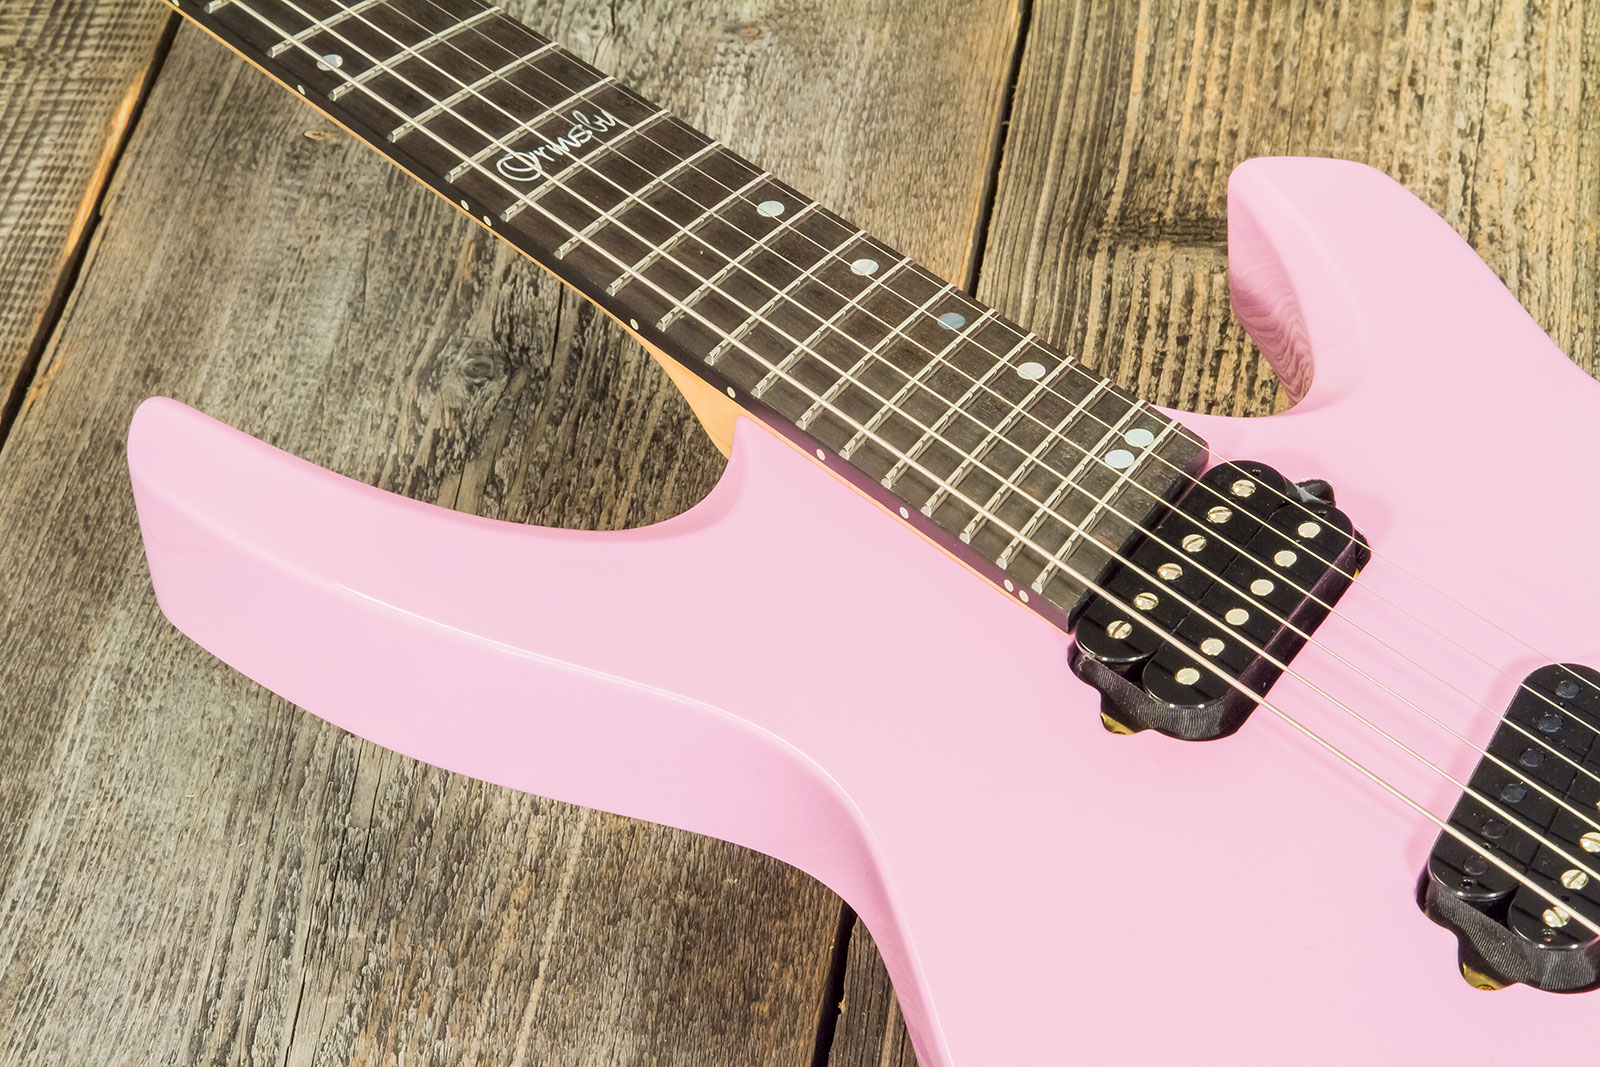 Ormsby Goliath Headless Gtr Run 14c Multiscale 2h Ht Eb - Shell Pink - Guitare Électrique Multi-scale - Variation 2